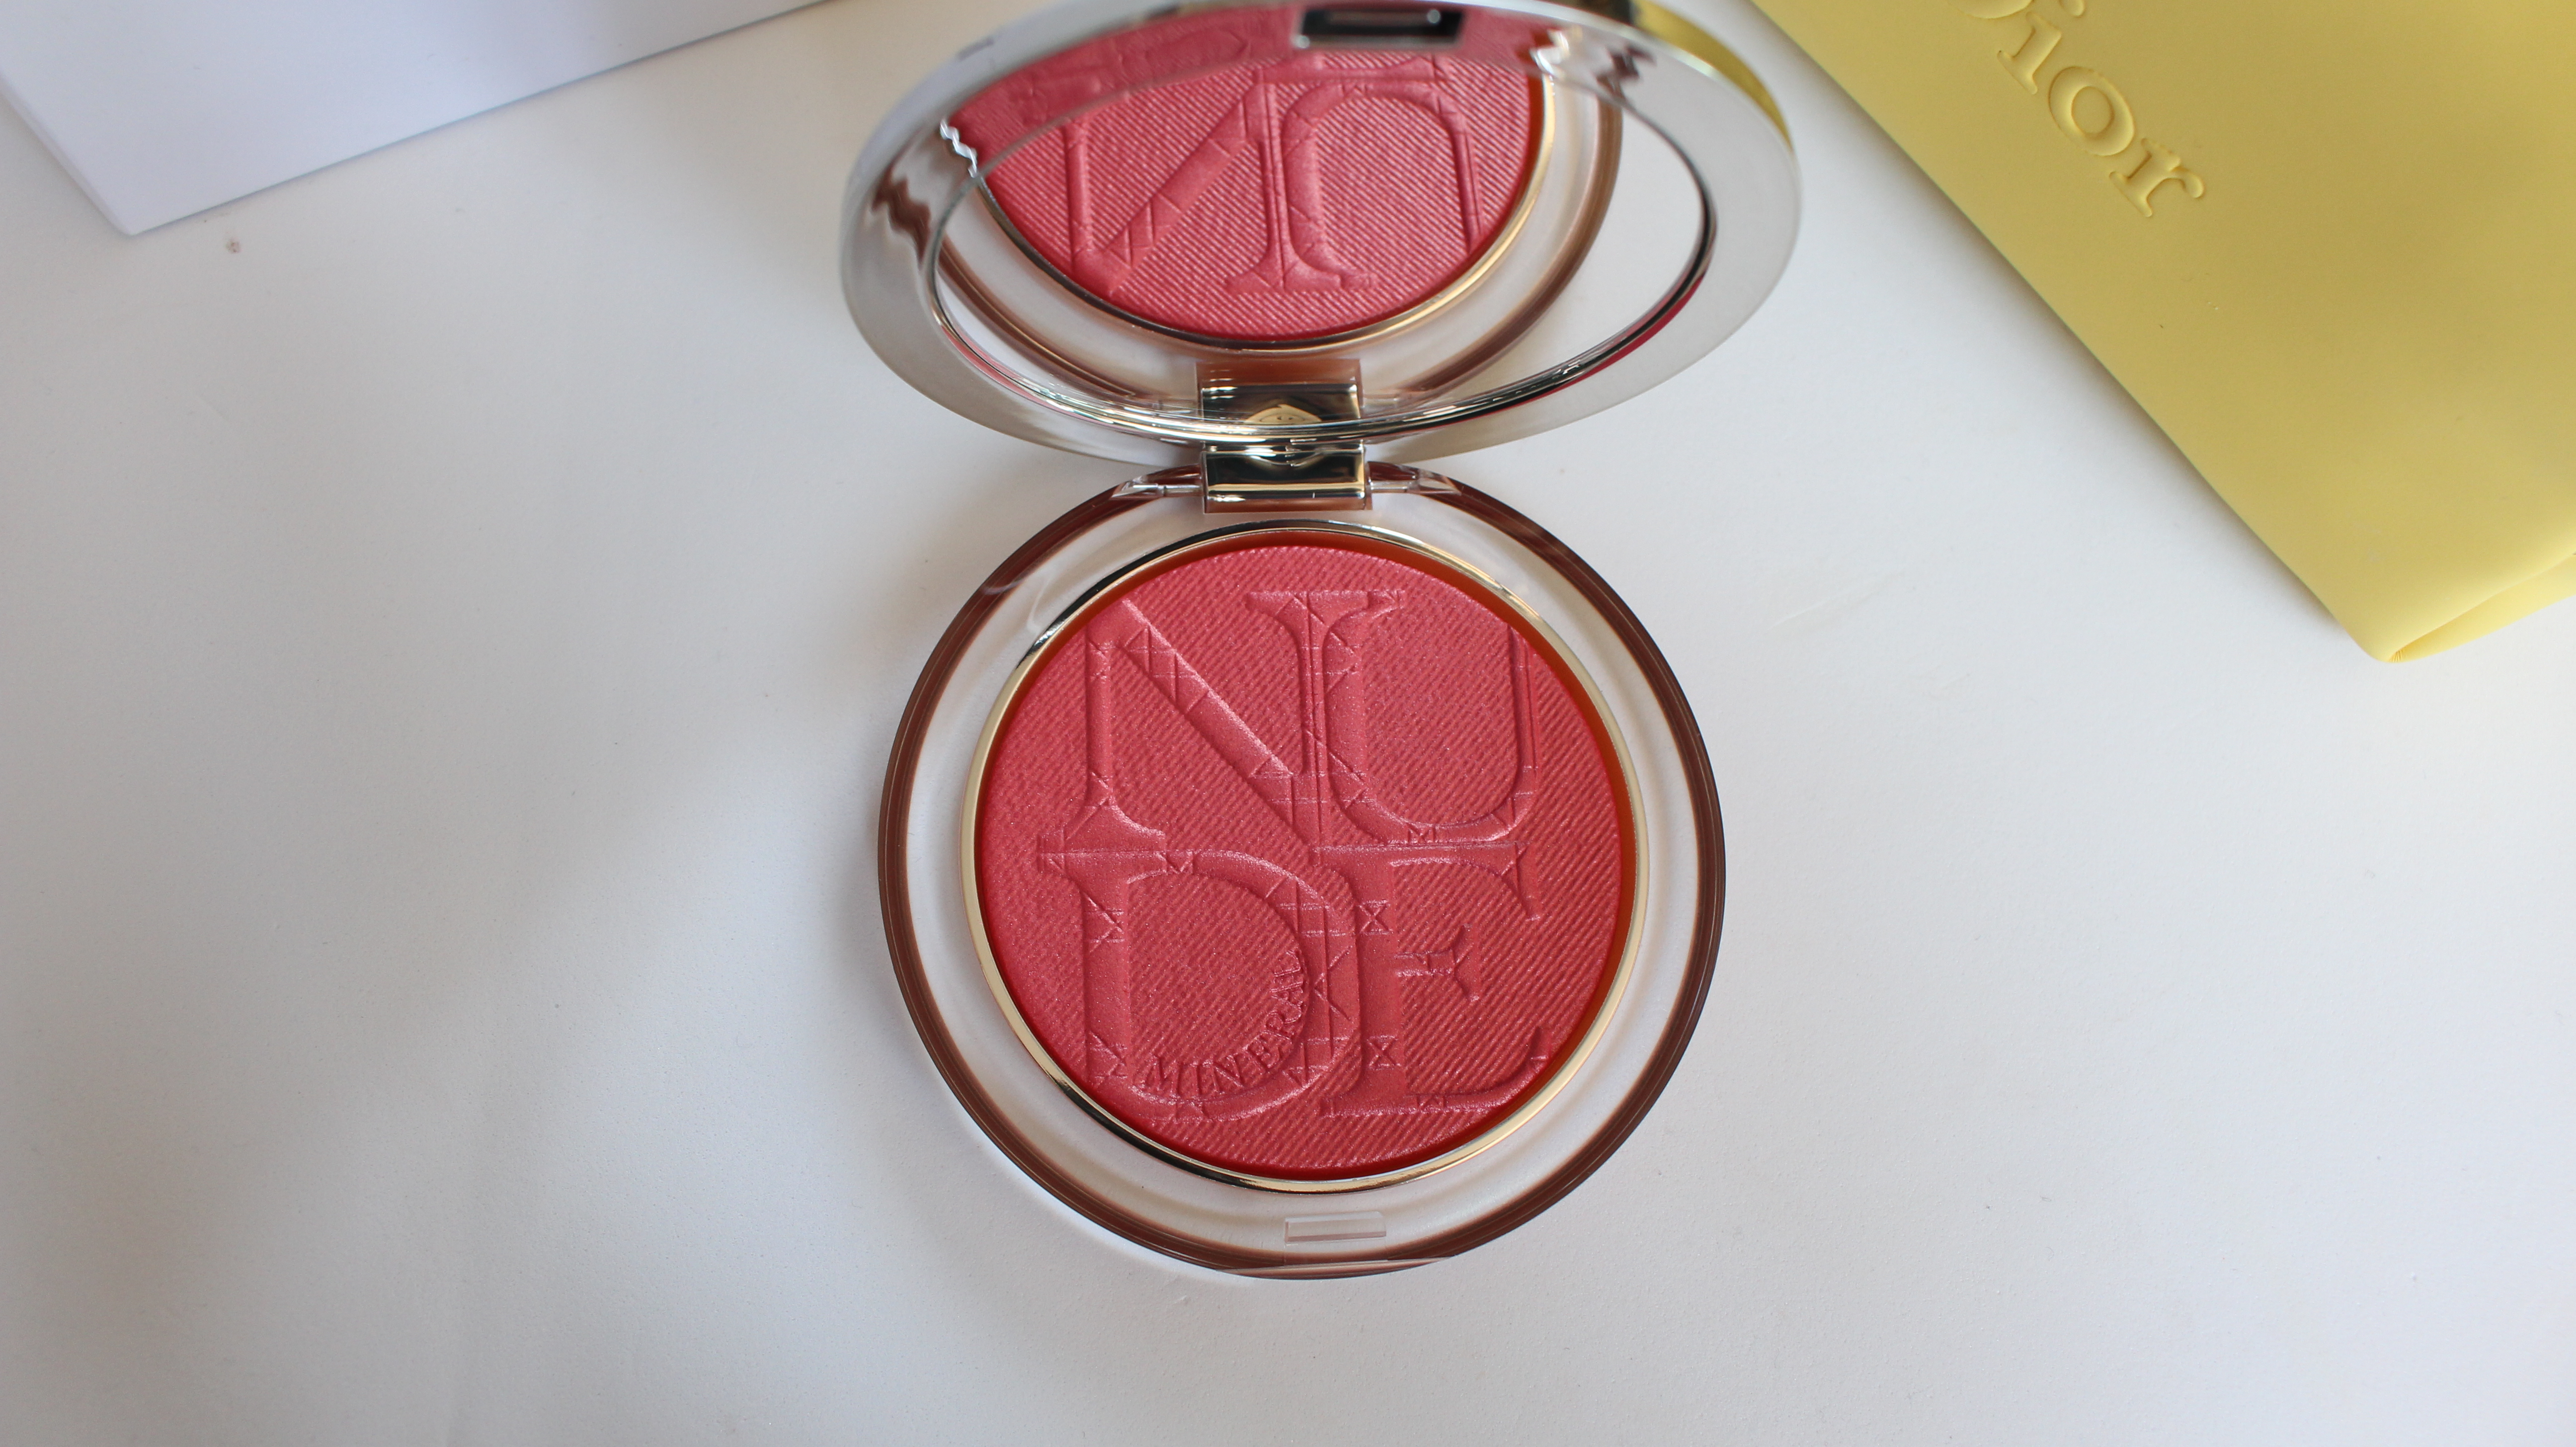 DIOR Luminizer Blush Review and 